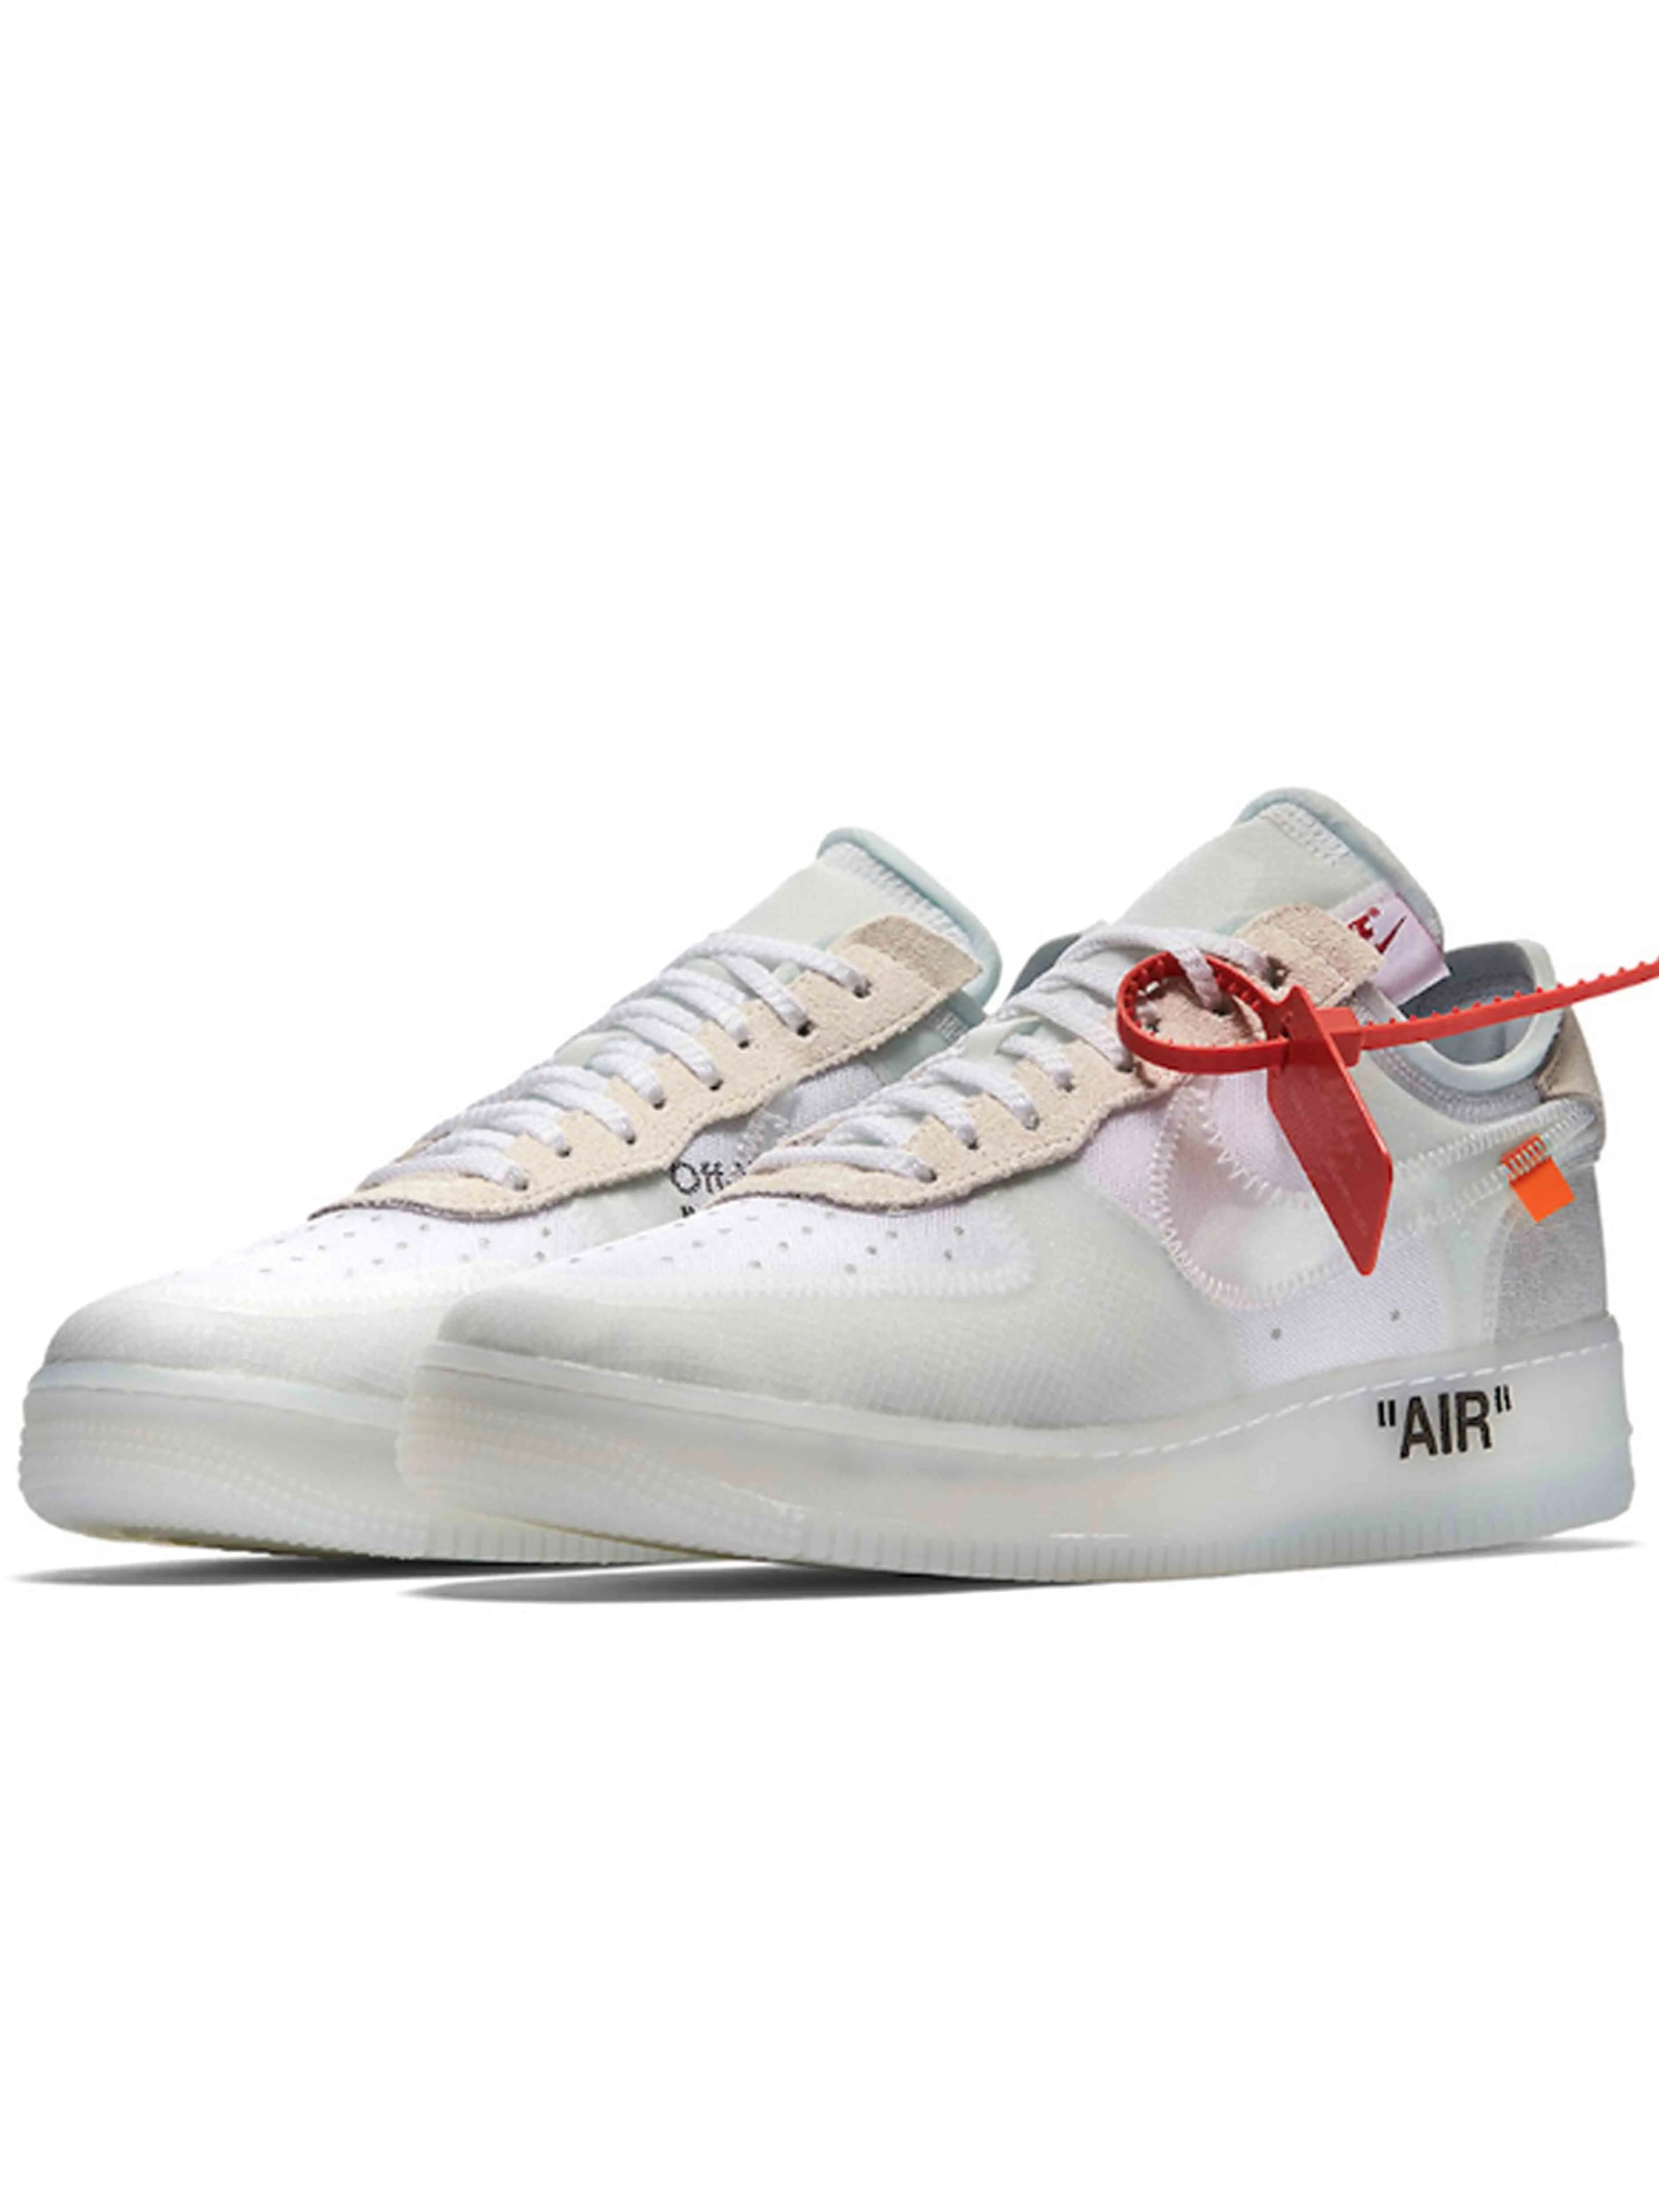 NIKE OFF WHITE Air Force 1 The Ten Size 10 *Heavily Used  Condition**Restoration* $178.00 - PicClick